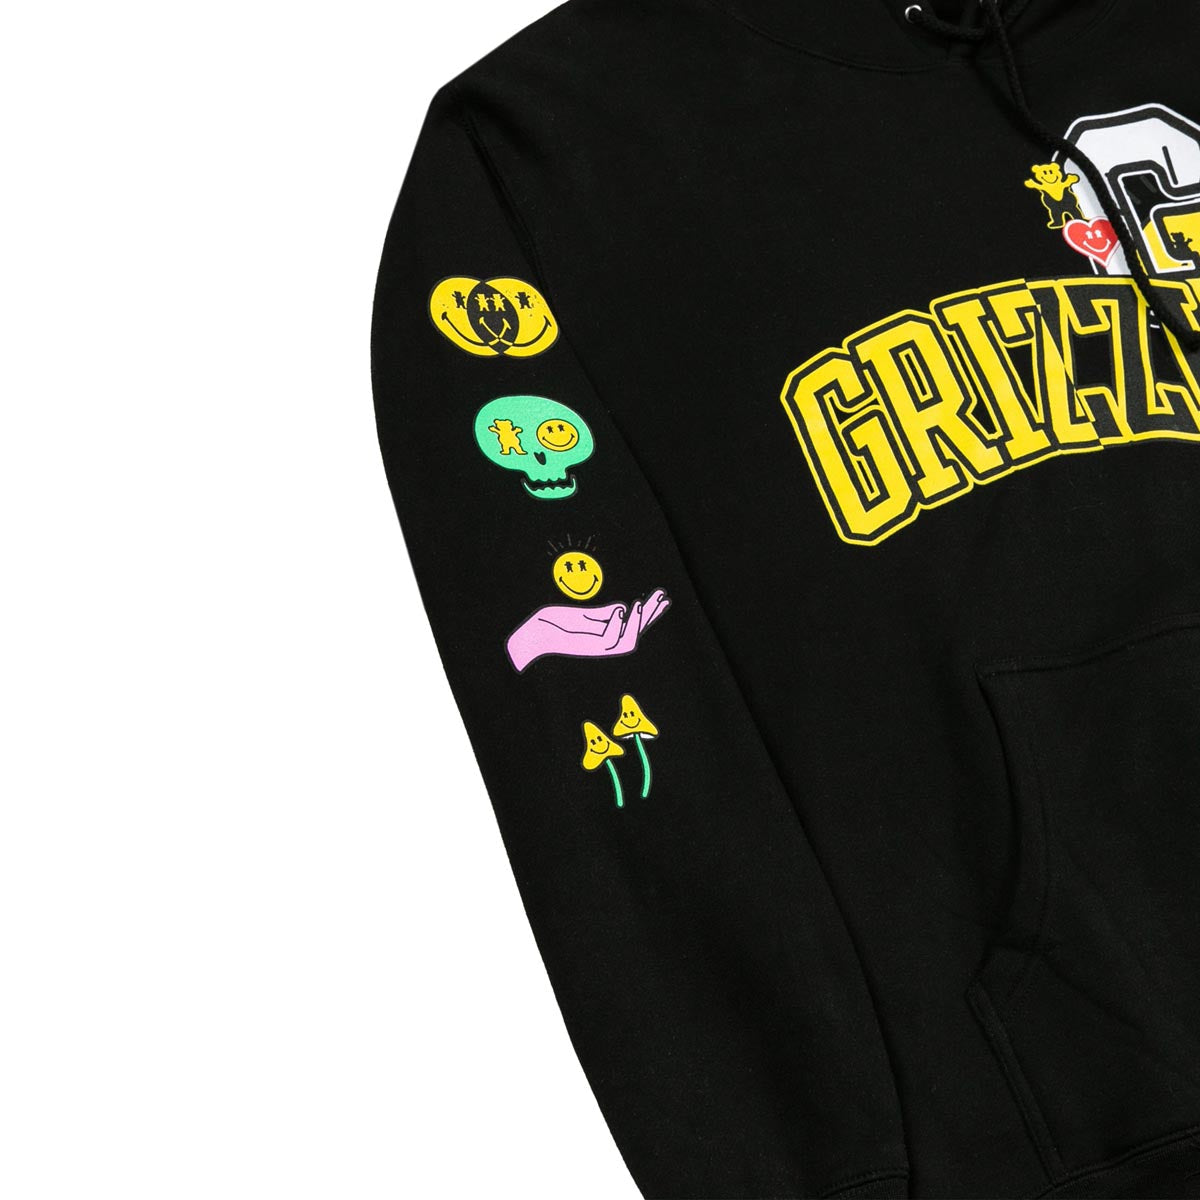 Grizzly x Smiley World Hoodie - Black image 3